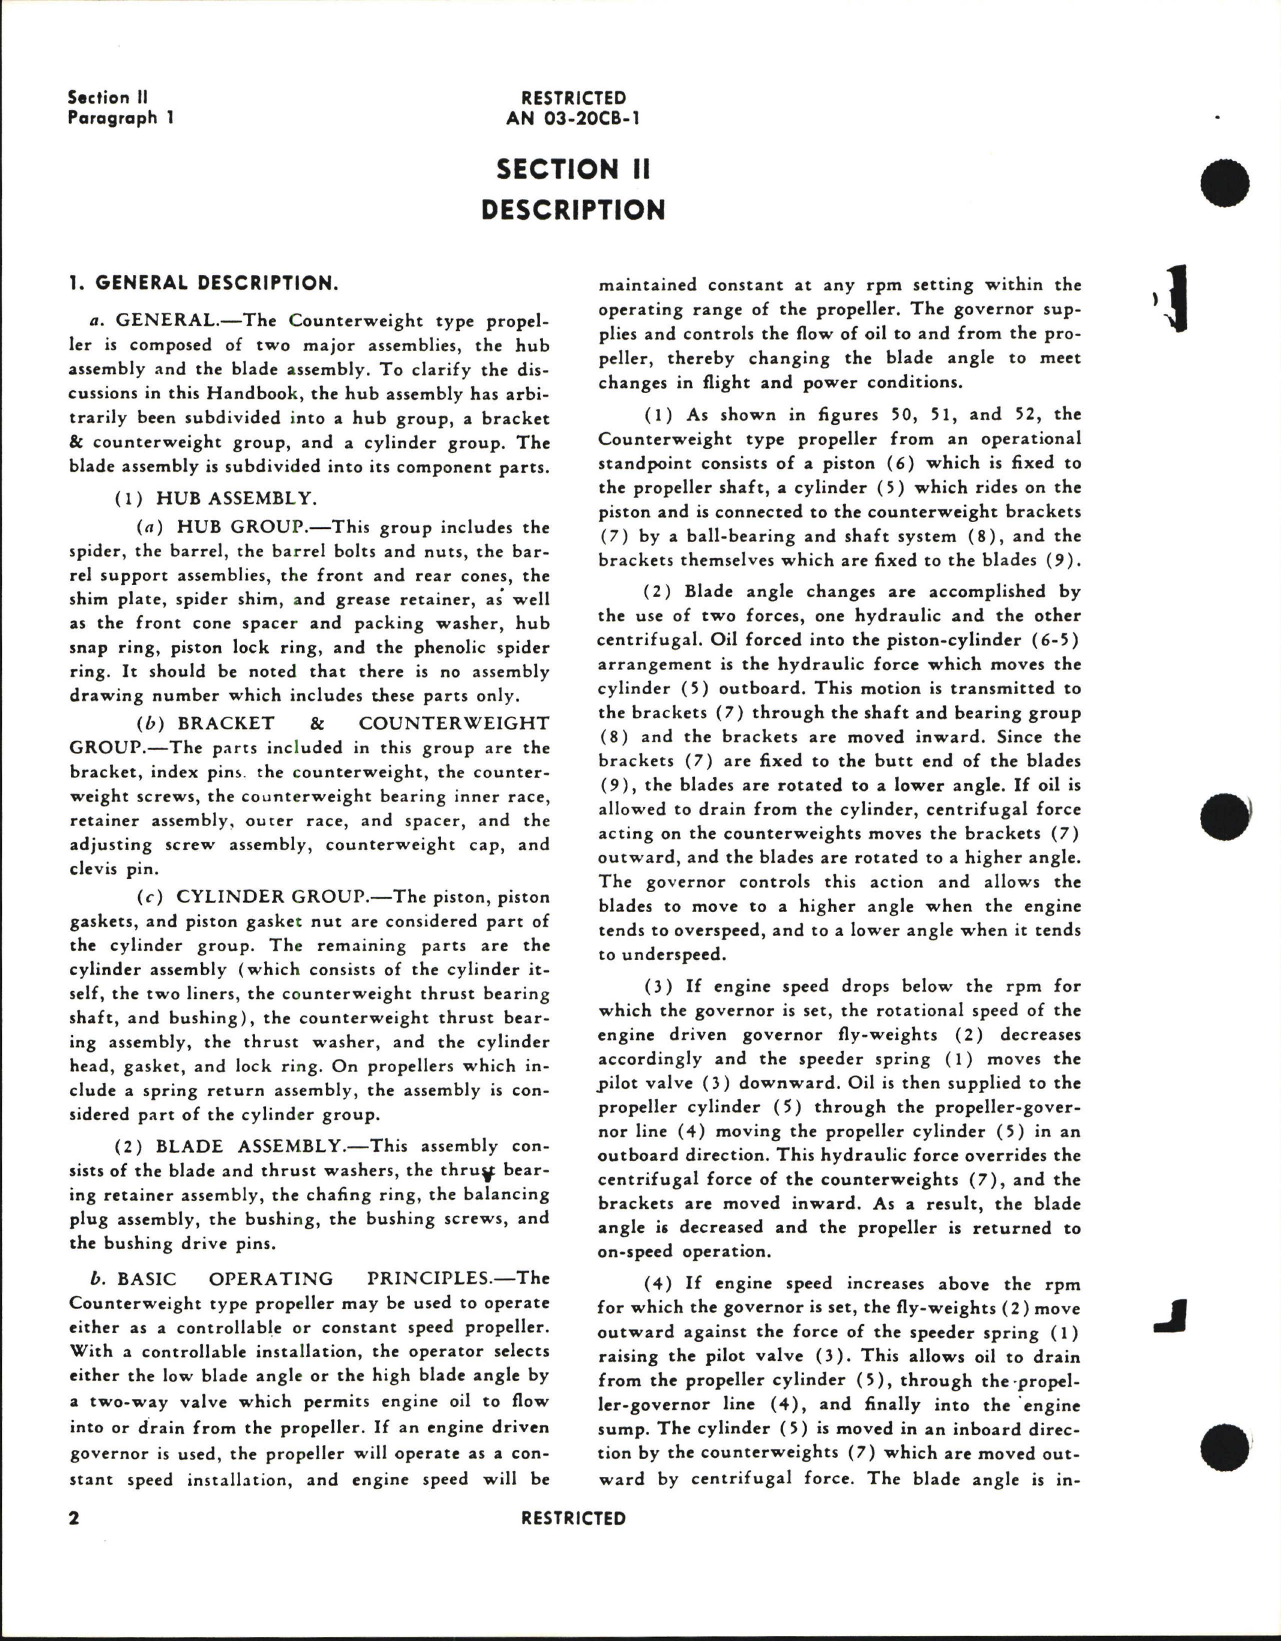 Sample page 6 from AirCorps Library document: Operation, Service, & Overhaul Instructions for Counterweight Props 2B20, 2D30, 2E40, 3D40, 3E50, & 12D40